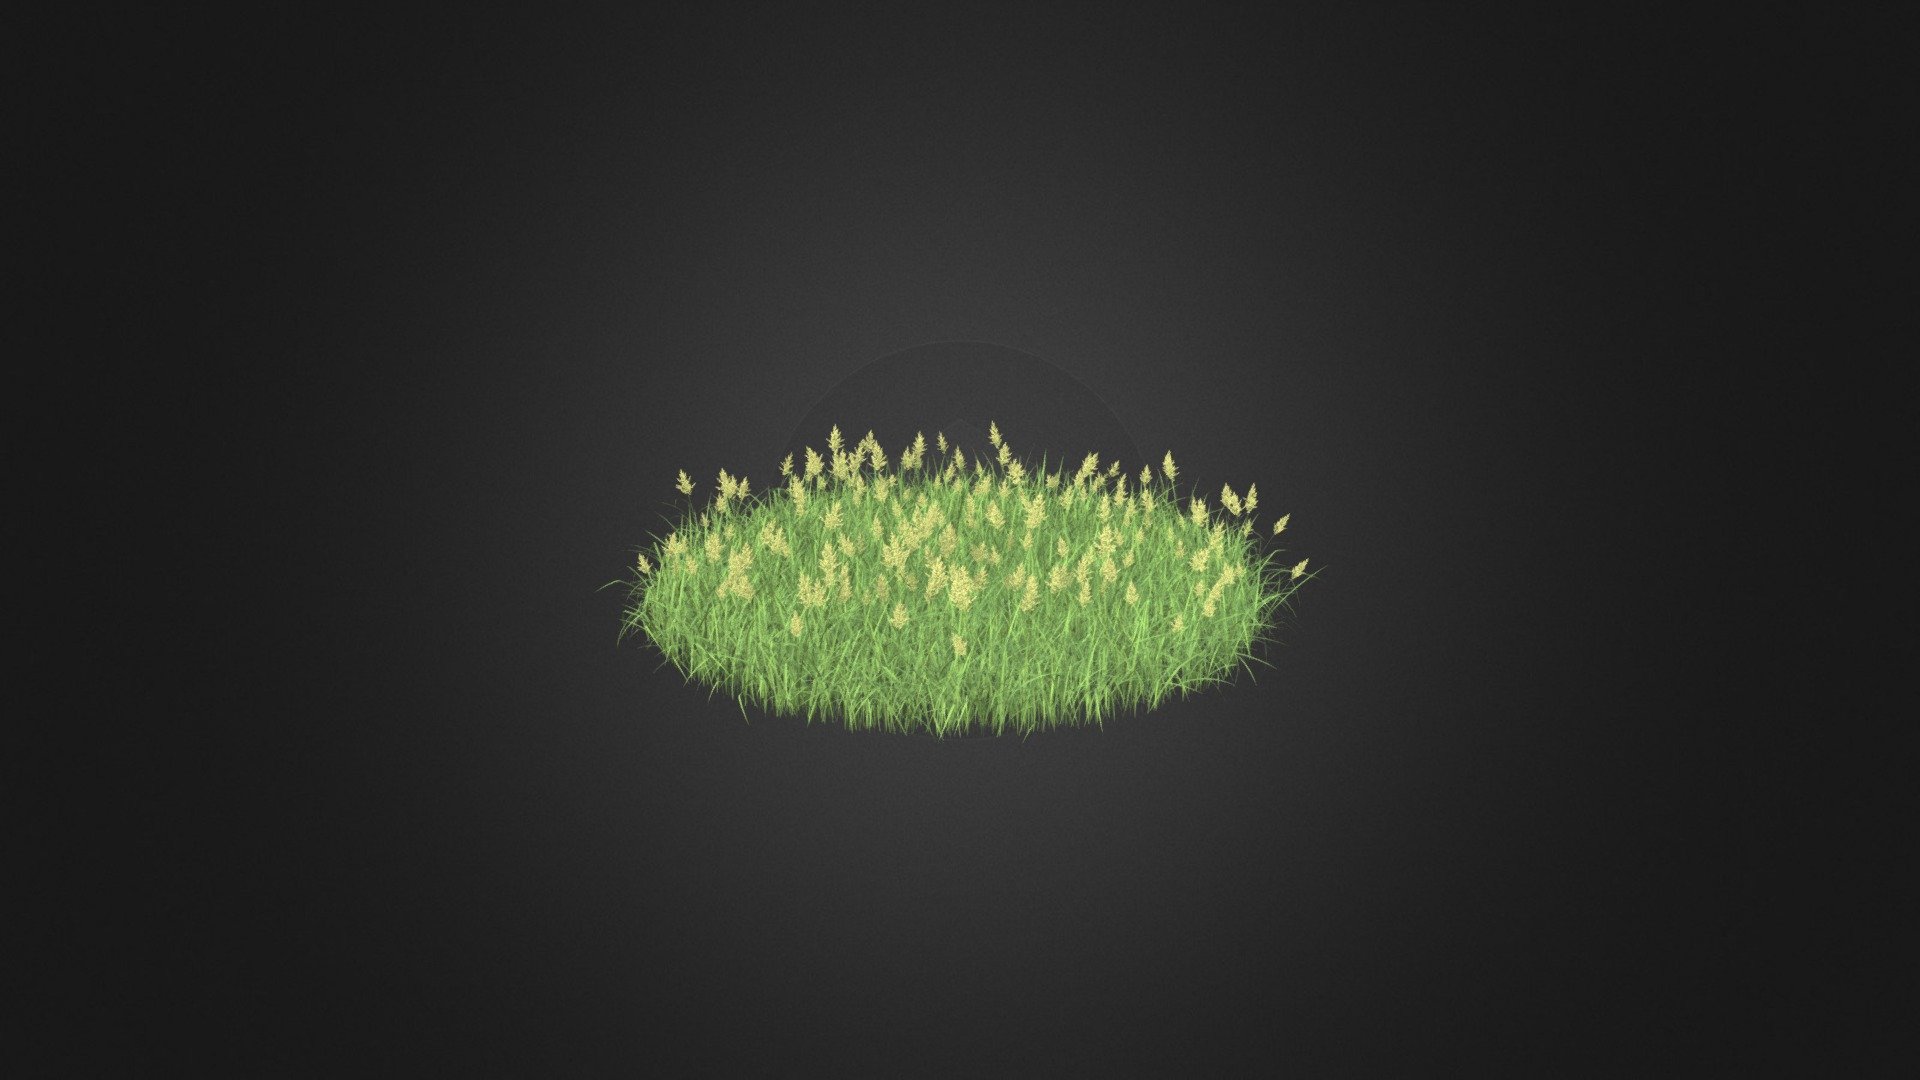 Round shaped flowering grass 3d model. Diameter: 160cm. Compatible with 3ds max 2010 or higher, Cinema 4D and many more 3d model